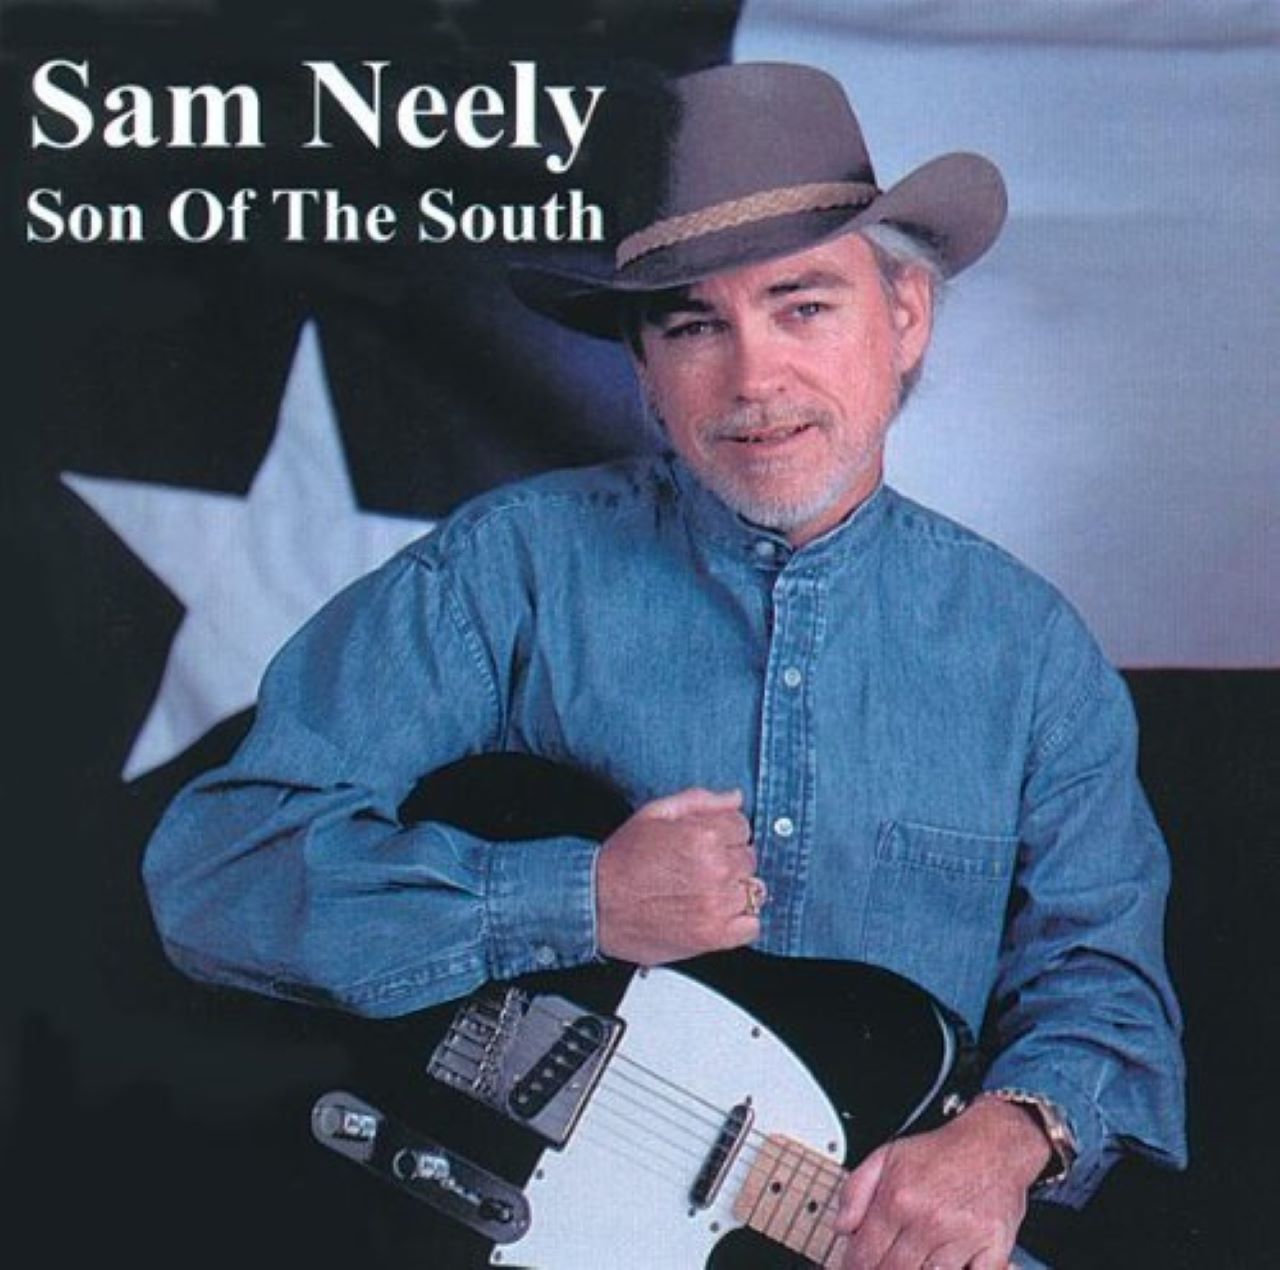 Sam Neely - Son Of The South cover album